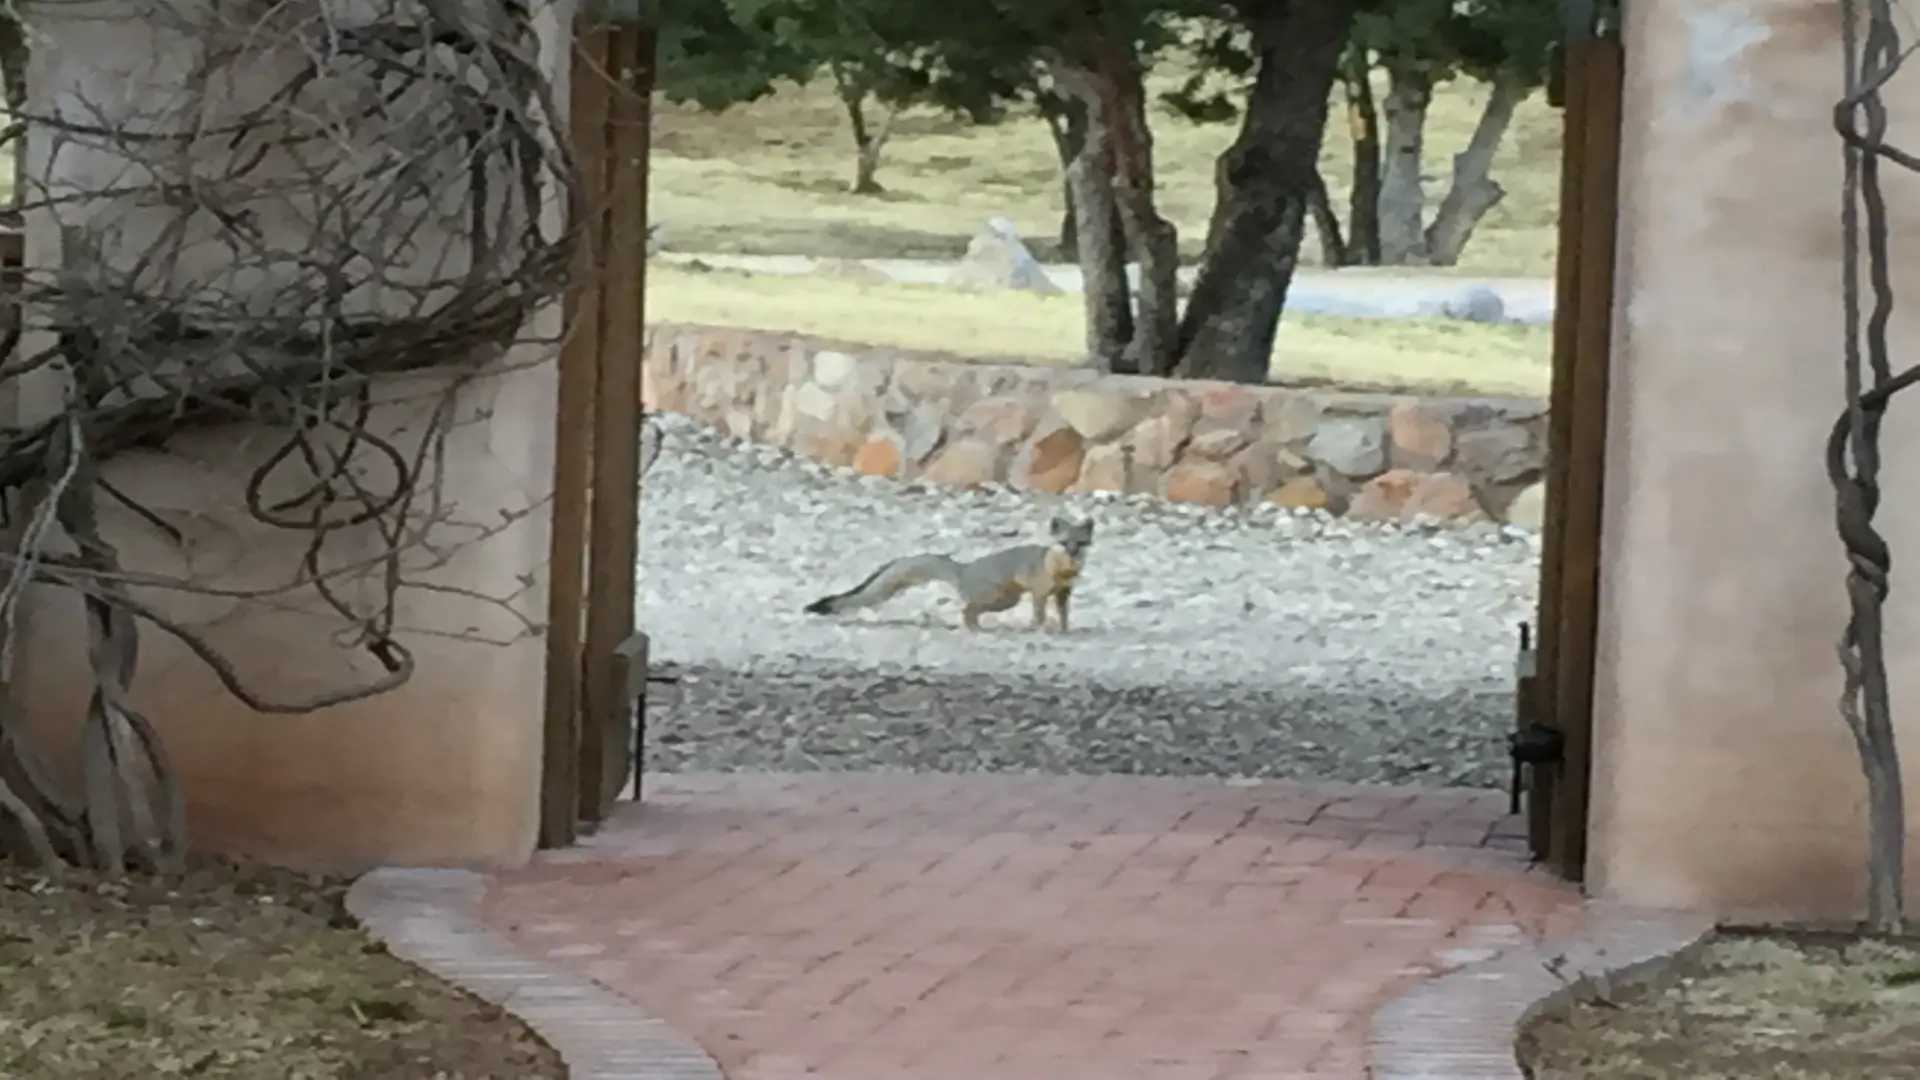 A coyote outside the door with trees in the back